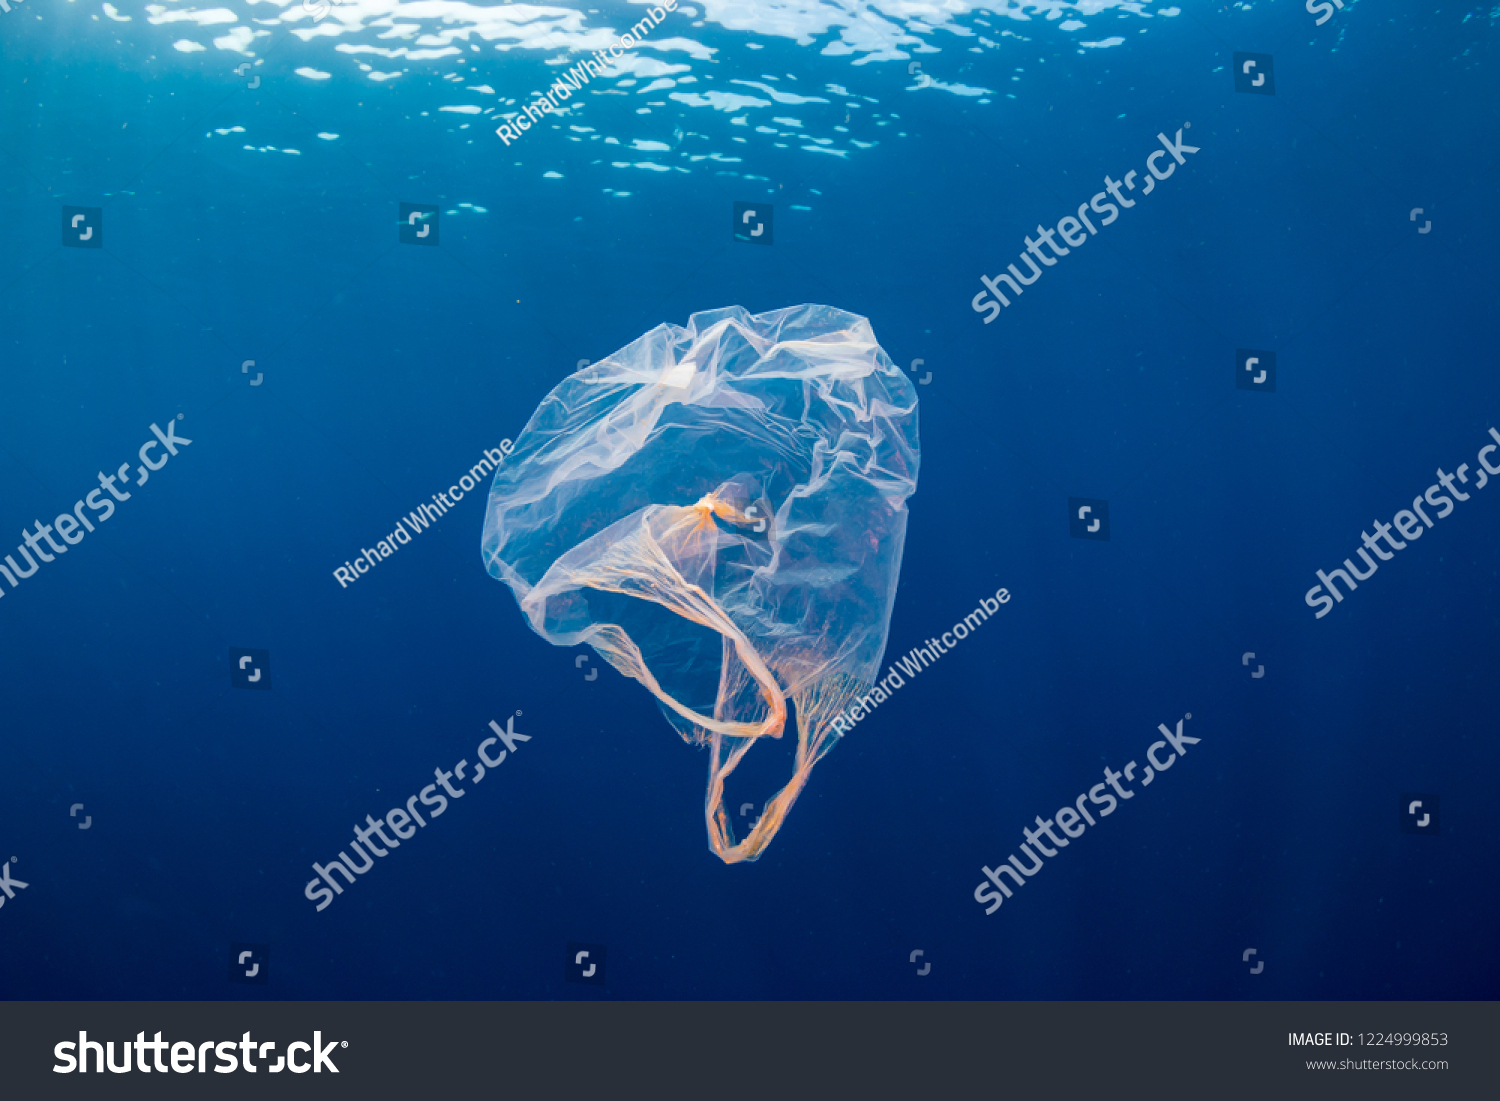 Underwater pollution:- A discarded plastic carrier bag drifting in a tropical, blue water ocean #1224999853